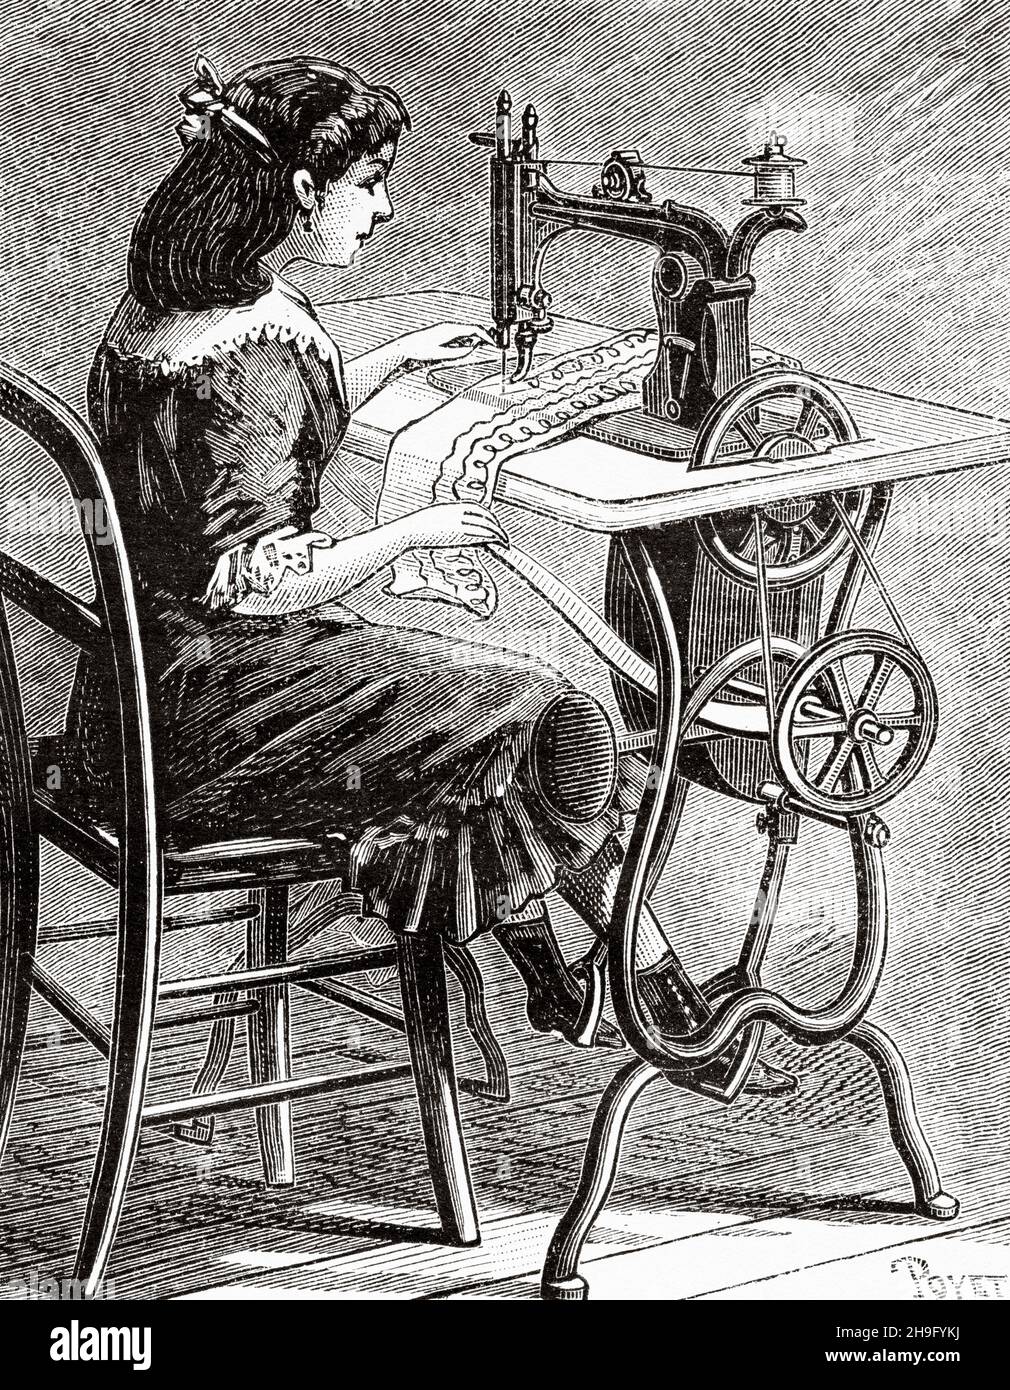 Woman using a treadle-powered sewing machine. Old 19th century engraved illustration from La Nature 1885 Stock Photo